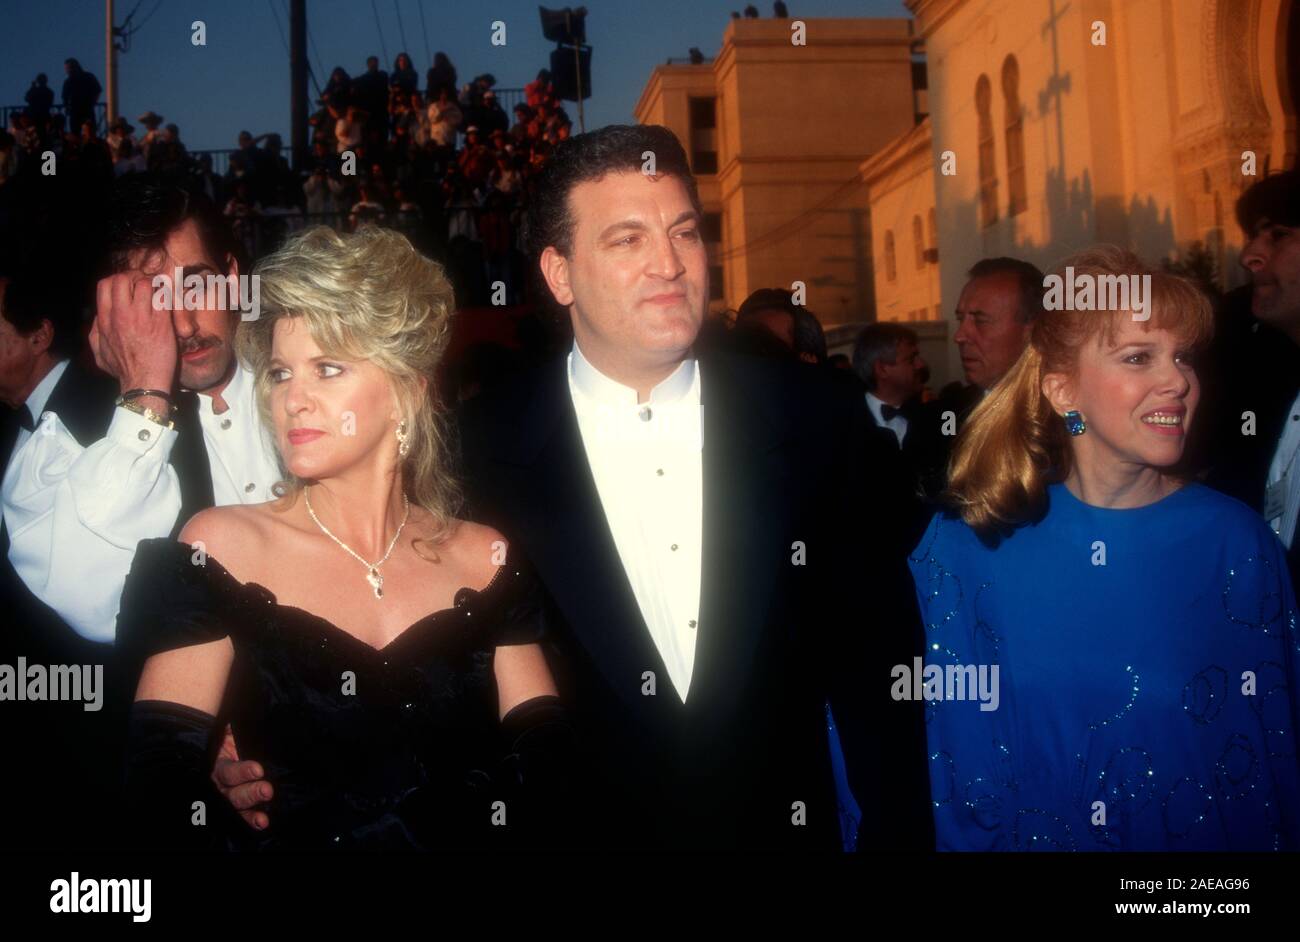 Los Angeles, California, USA 27th March 1995 Joey Buttafuoco and Mary Jo Buttafuoco attend the 67th Annual Academy Awards on March 27, 1995 at the Shrine Auditorium in Los Angeles, California, USA. Photo by Barry King/Alamy Stock Photo Stock Photo